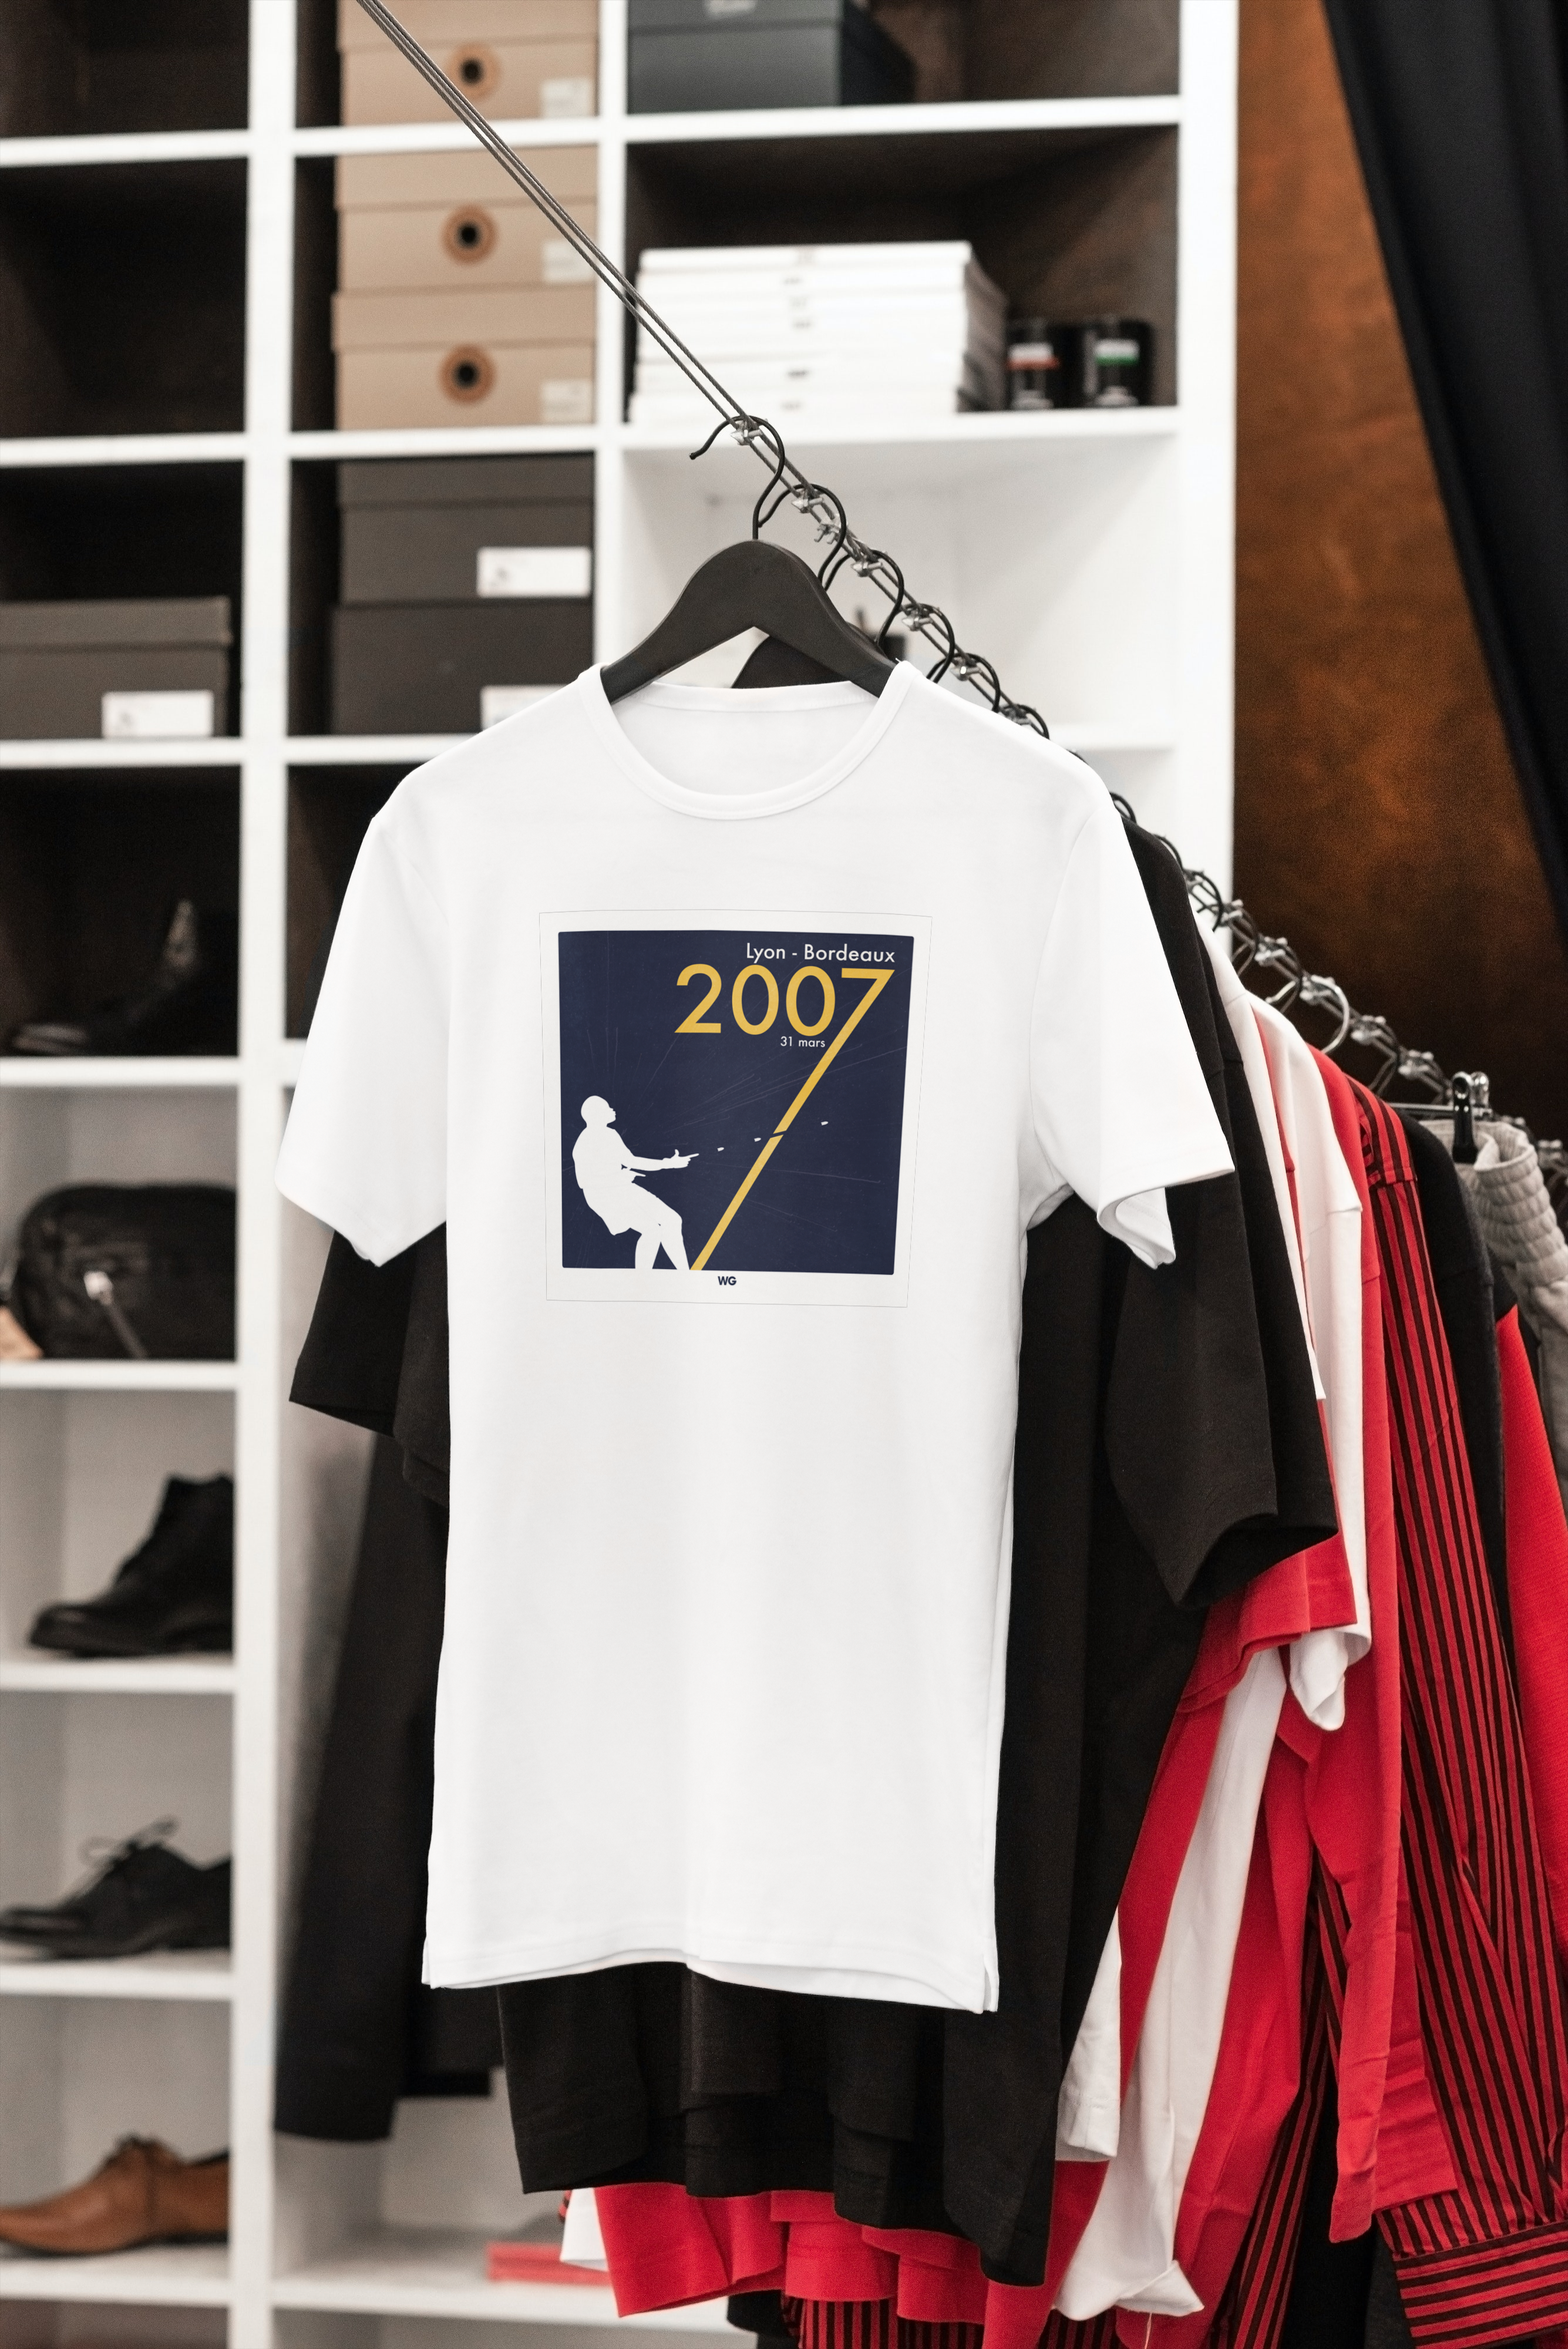 T-shirt on the hanger in the store_Illustration_sans_titre 8.png (14.08 MB)